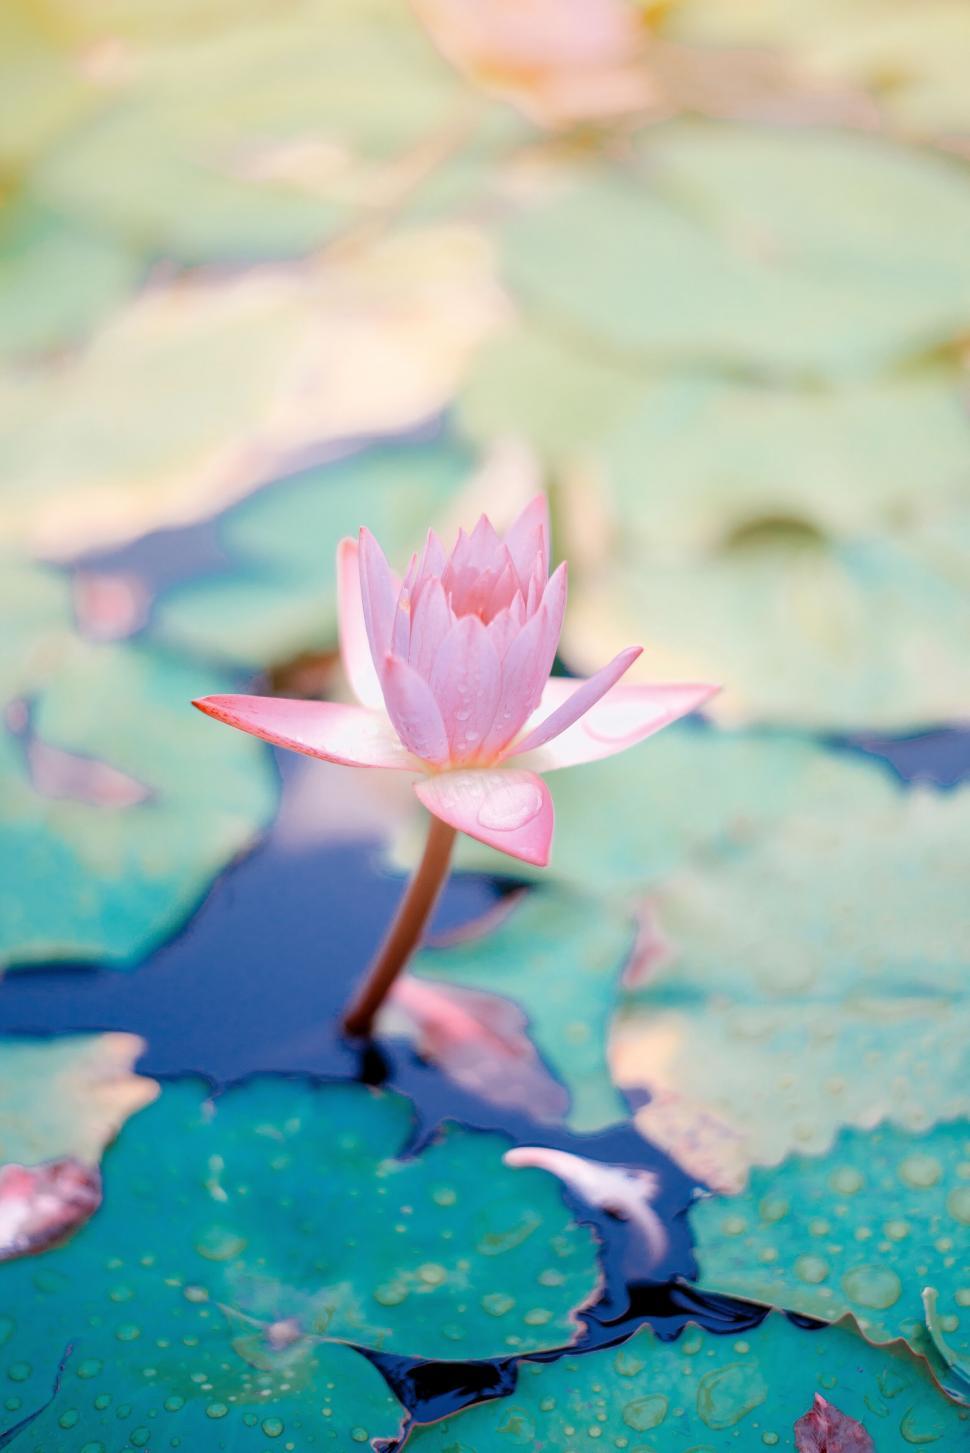 Free Image of A pink flower in water 